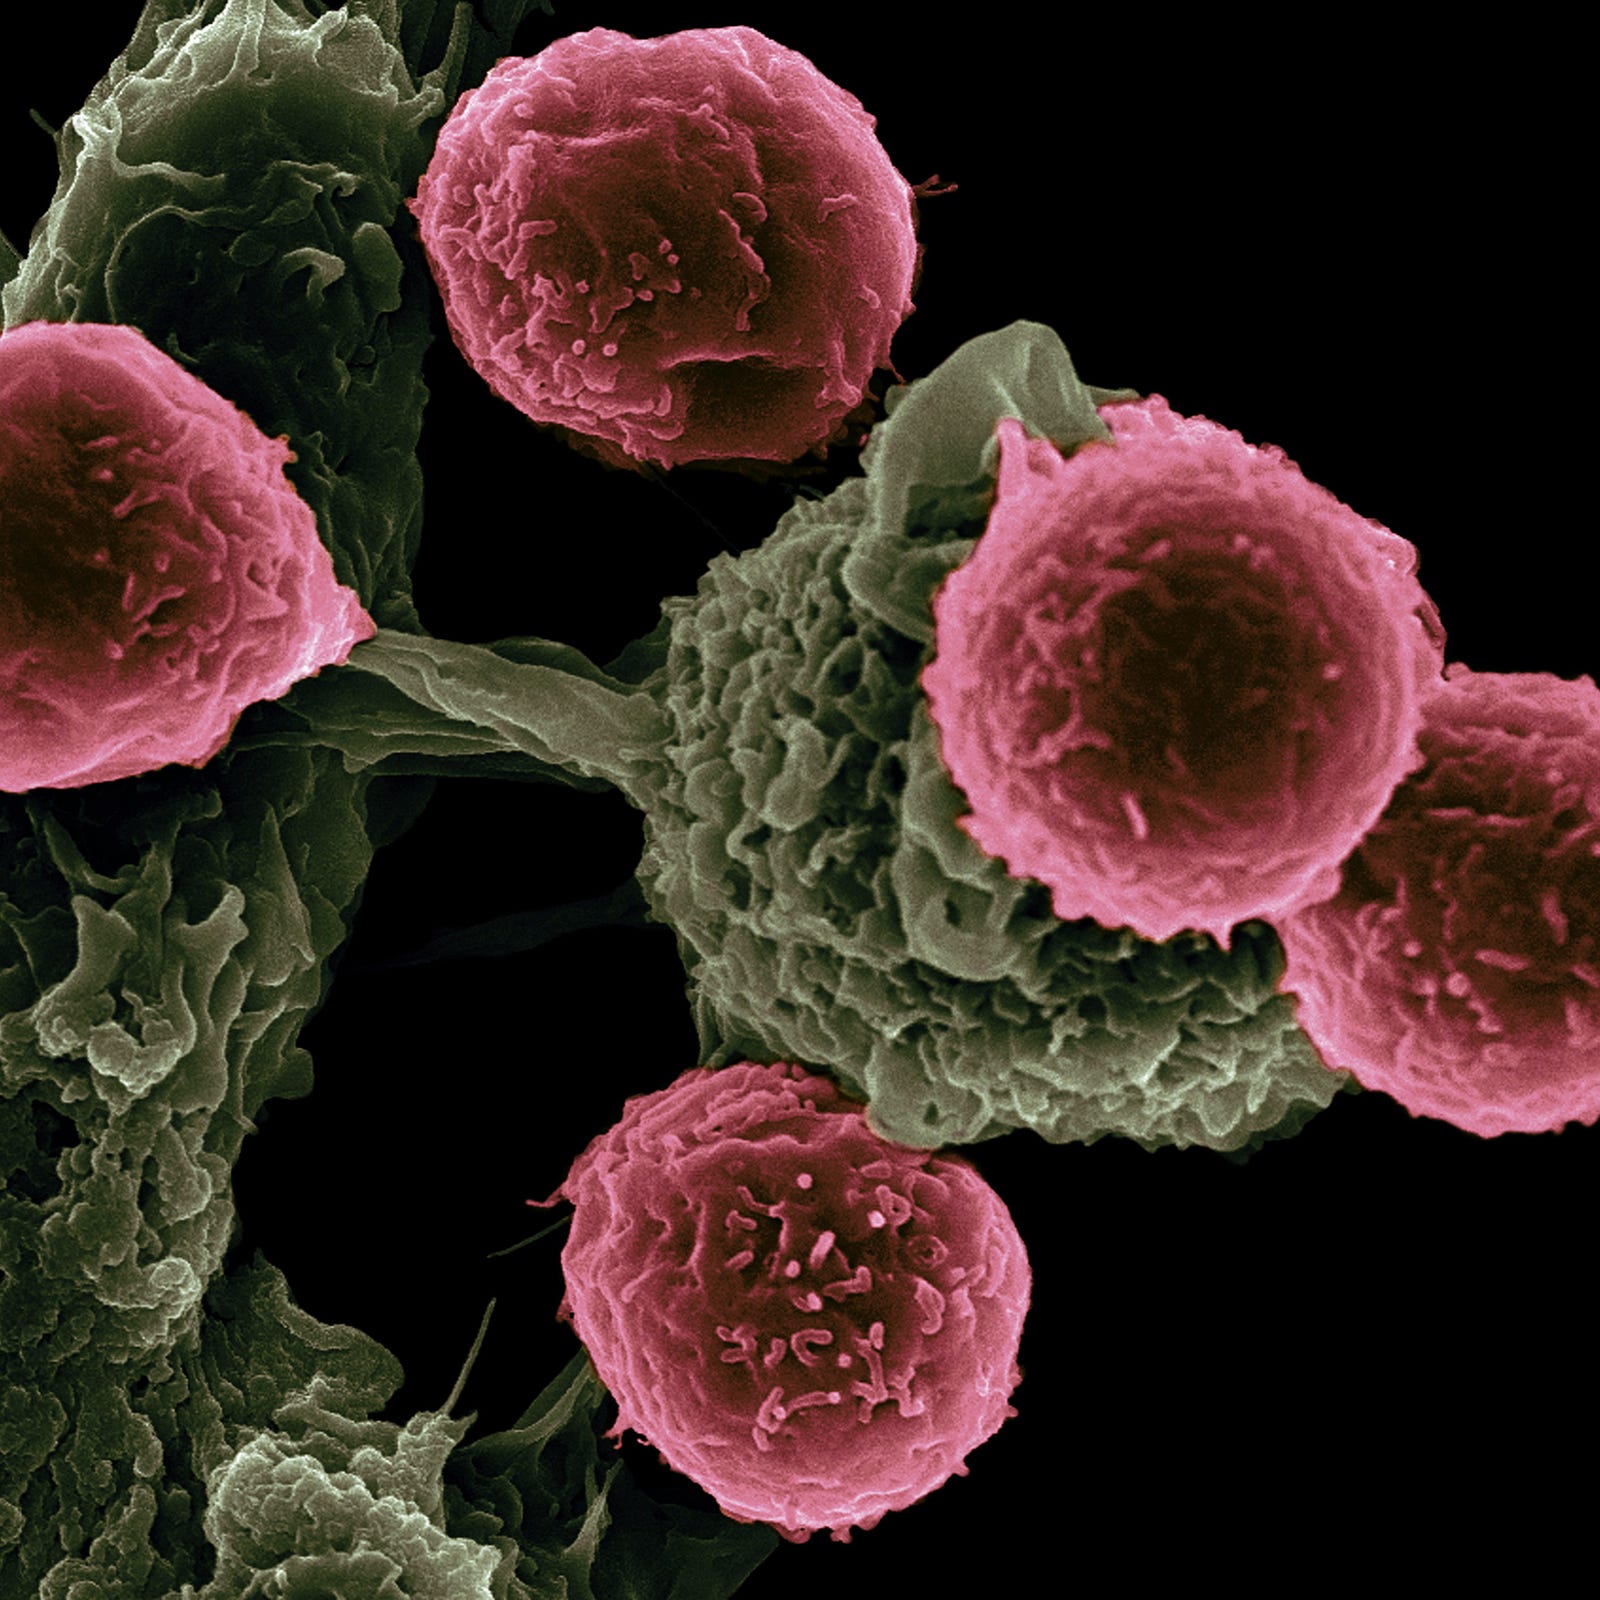 A cancer cell under a microscope. The reasons behind the cancer-fighting power of exercise lie in its ability to help maintain a healthy body weight, control inflammation, improve insulin sensitivity, and regulate hormones like estrogen.